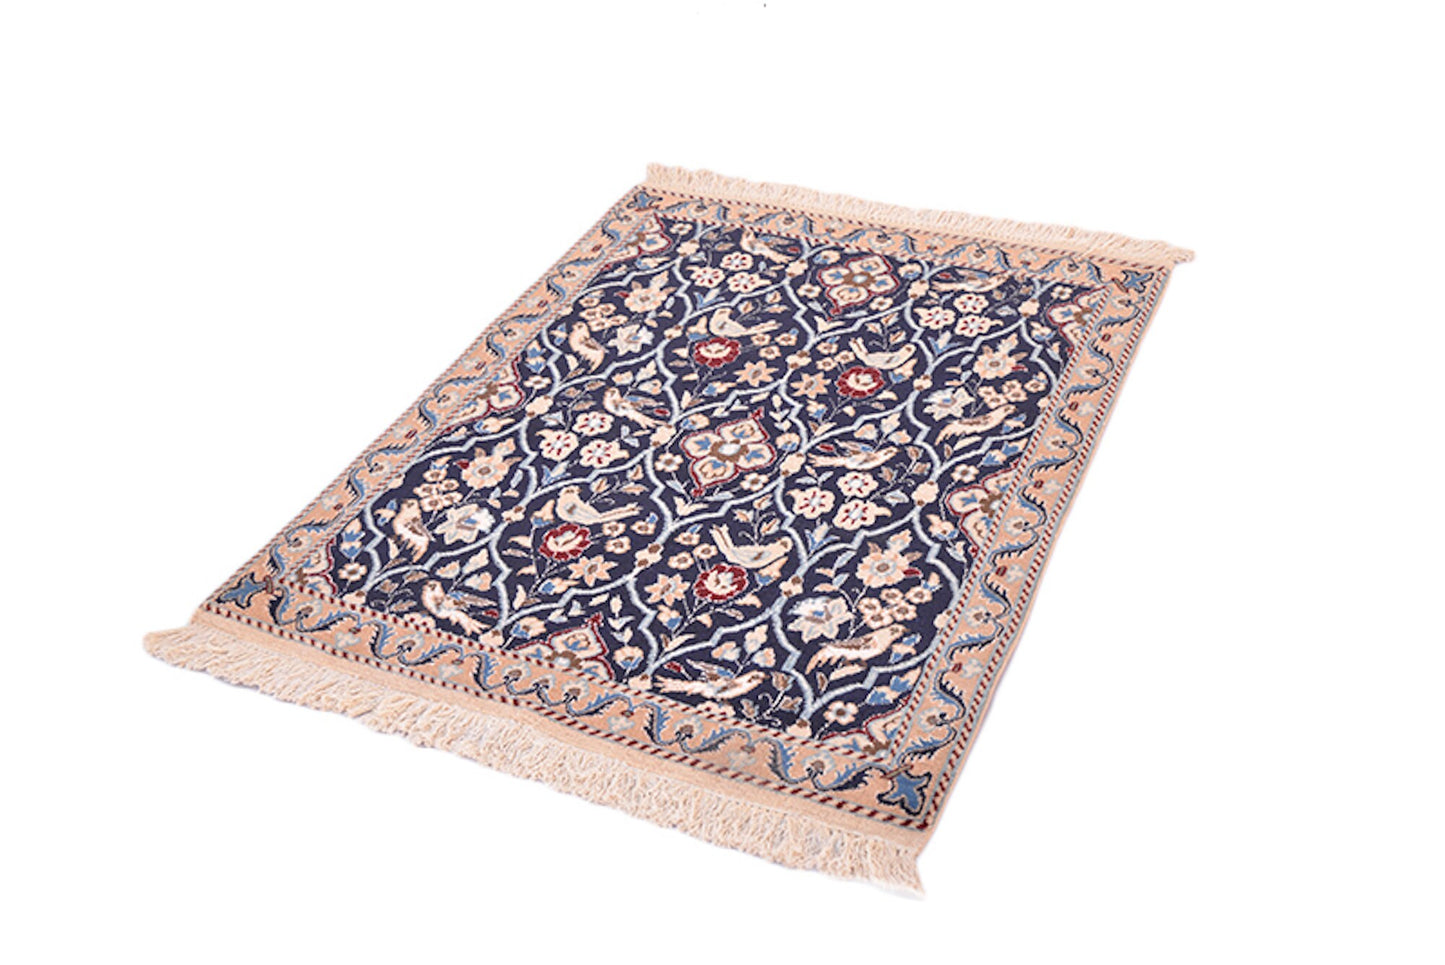 Navy Floral Area Rug 3x4 | Handmade Persian Style Rug with Light Coral Border | Hand Knotted with Soft Wool